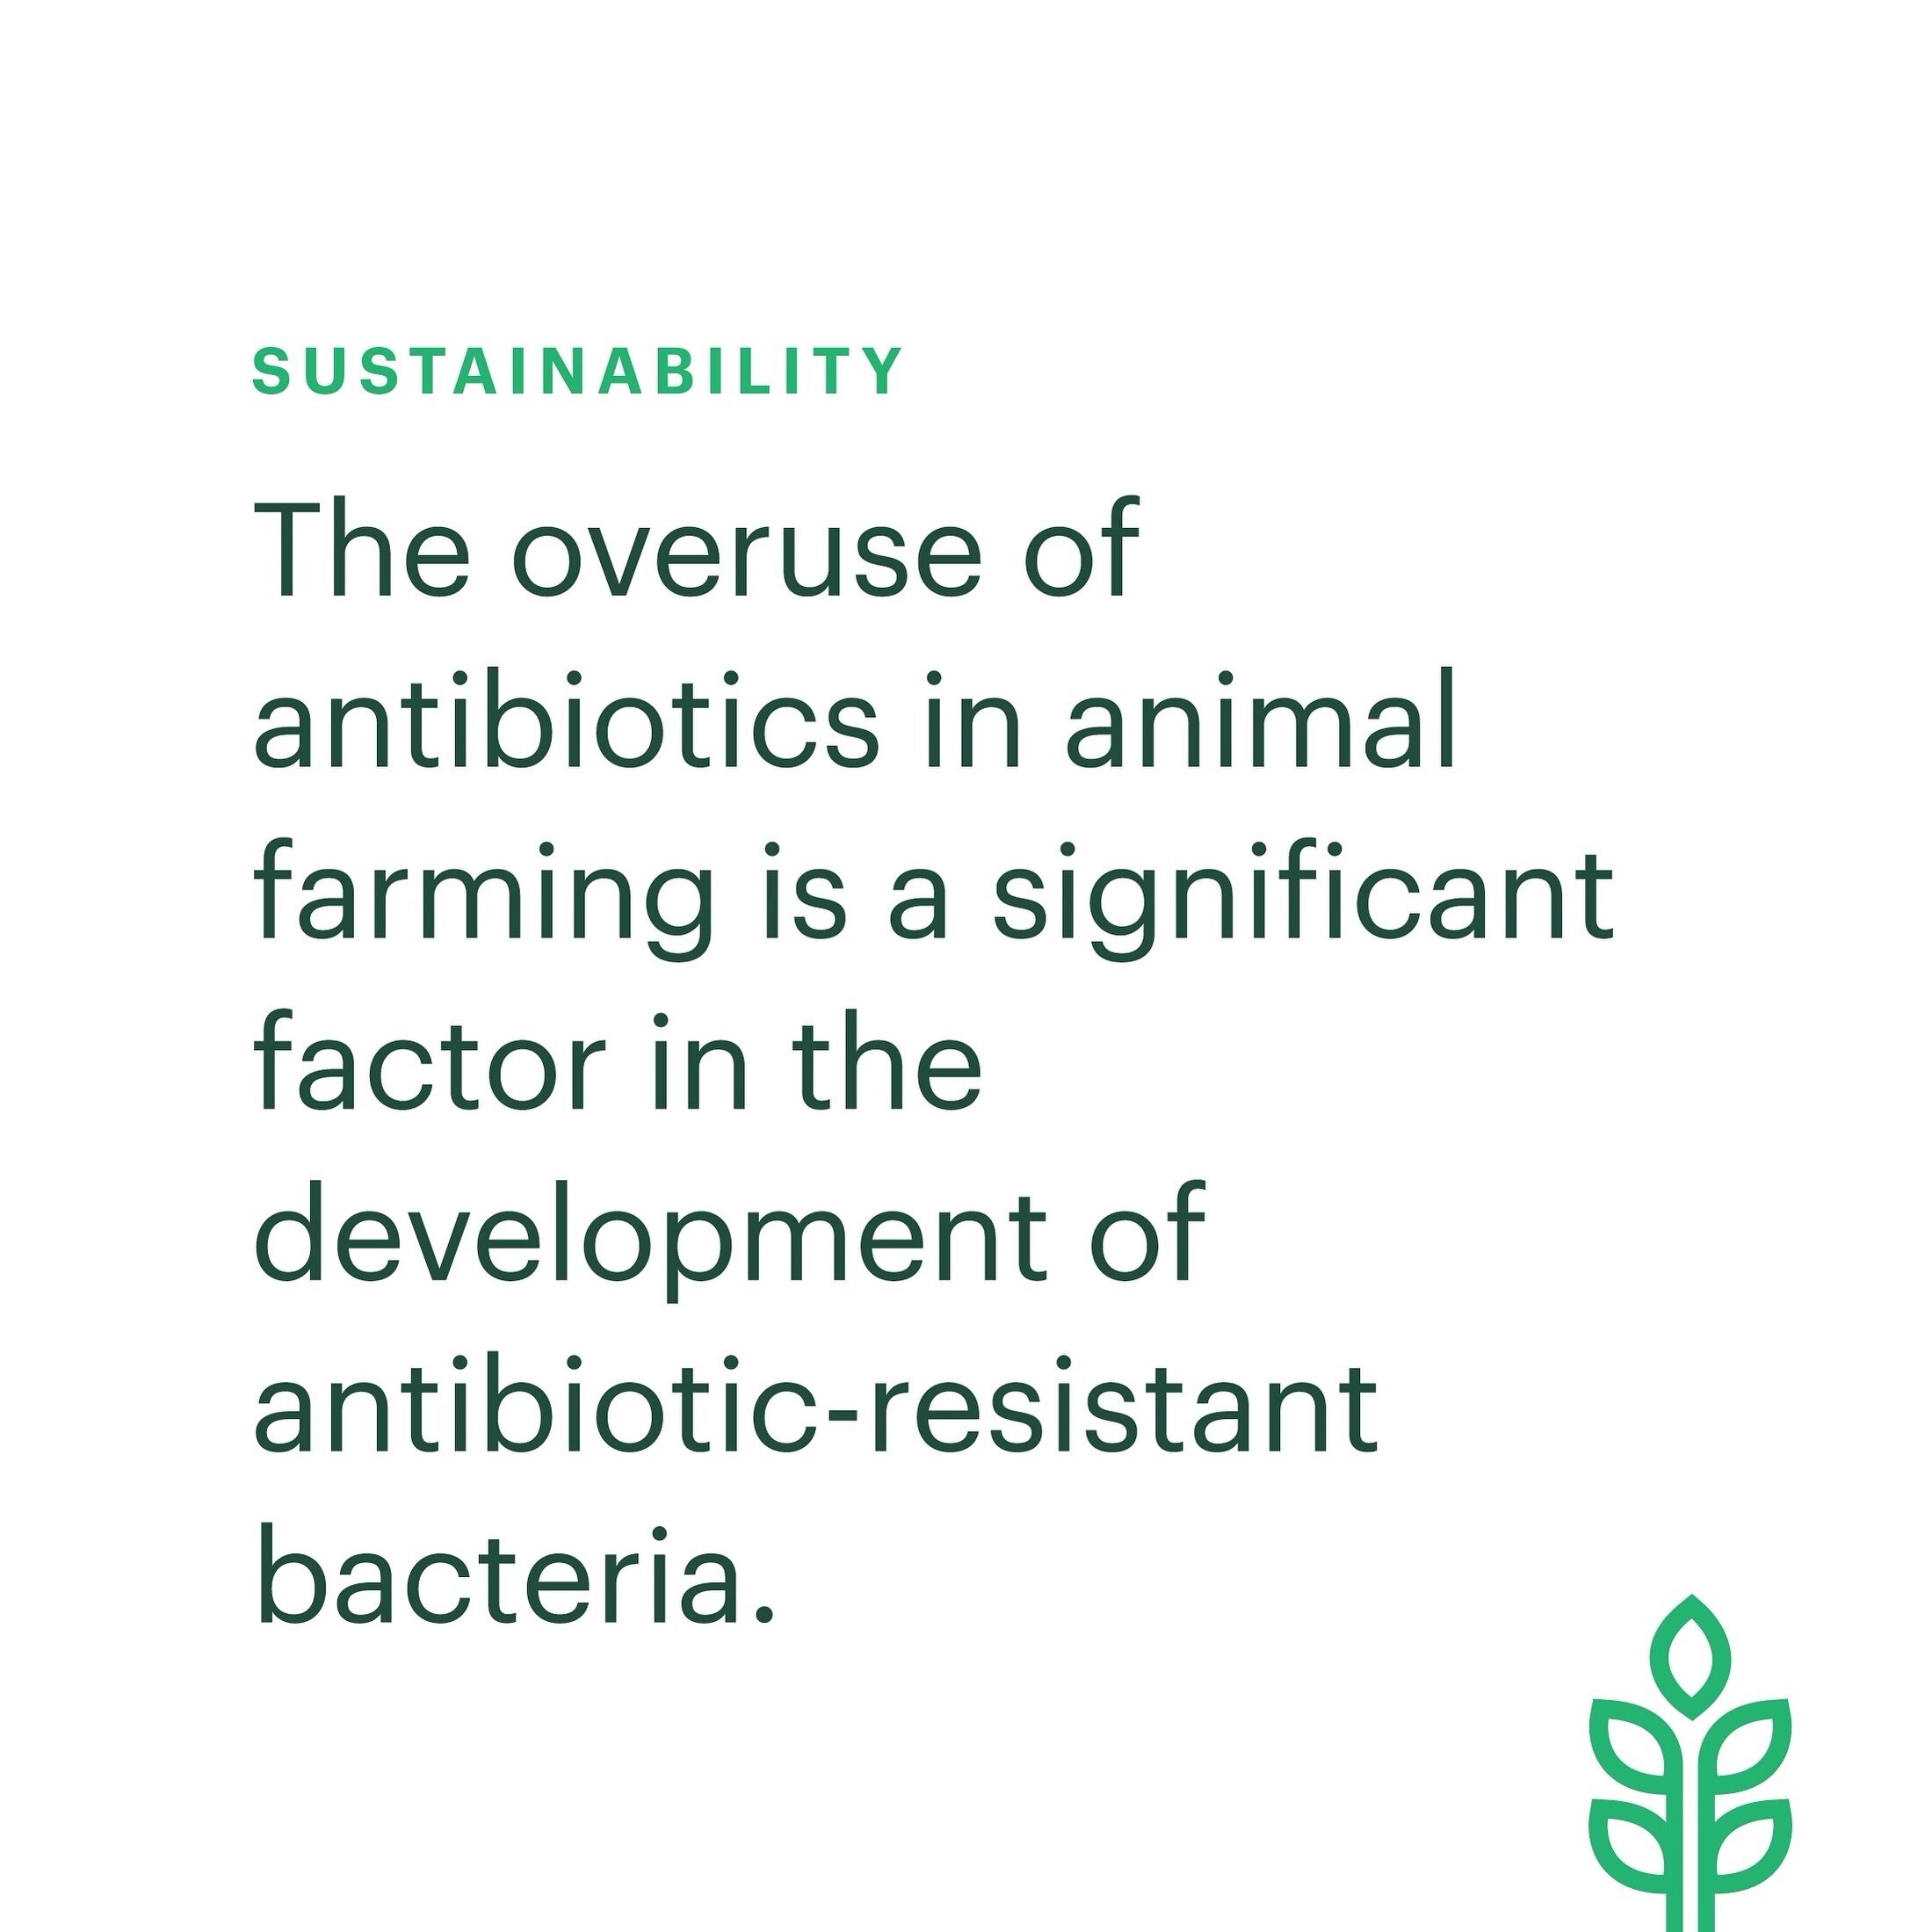 The overuse of antibiotics in animal agriculture, driven by their application not only for treating infections but also for disease prevention and growth promotion in livestock, is a significant factor contributing to the development of antibiotic-re